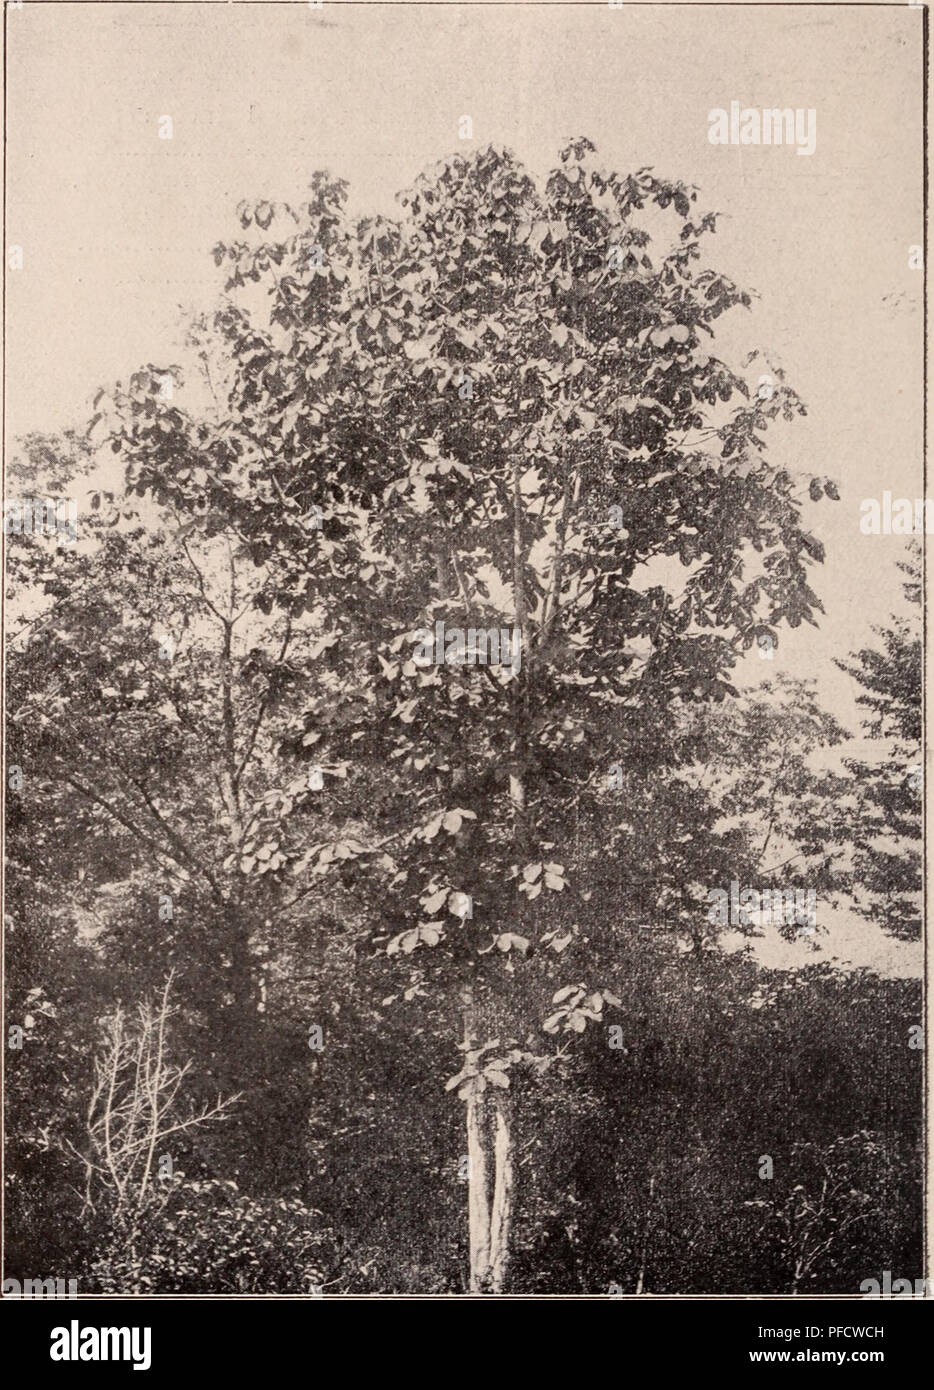 . Descriptive catalogue of flowering, ornamental trees, shrubs, bulbs, herbs, climbers, fruit trees, &amp;c., &amp;c., &amp;c. / for sale by the Yokohama Nursery Co., Limited.. Nursery Catalogue. 38 CATALOGUE OF THE YOKOHAMA NURSERY Co., Ltd, (1912). 12. Magnolia parvi- flora, flore seiiii- pleiiO, the same with serai-double fl o A'er — height : li-2 ft.; per 10, $2.50. 13. &quot;MagnoliapiDiiila, leaves persistent, Avith thick petal- ed flower like a small round ball. Very attractive and fragrant (pot g r o vv n)—height: ]-U ft.; per 10, |3.50. 14. Magnolia stellata, stellate petals, light p Stock Photo